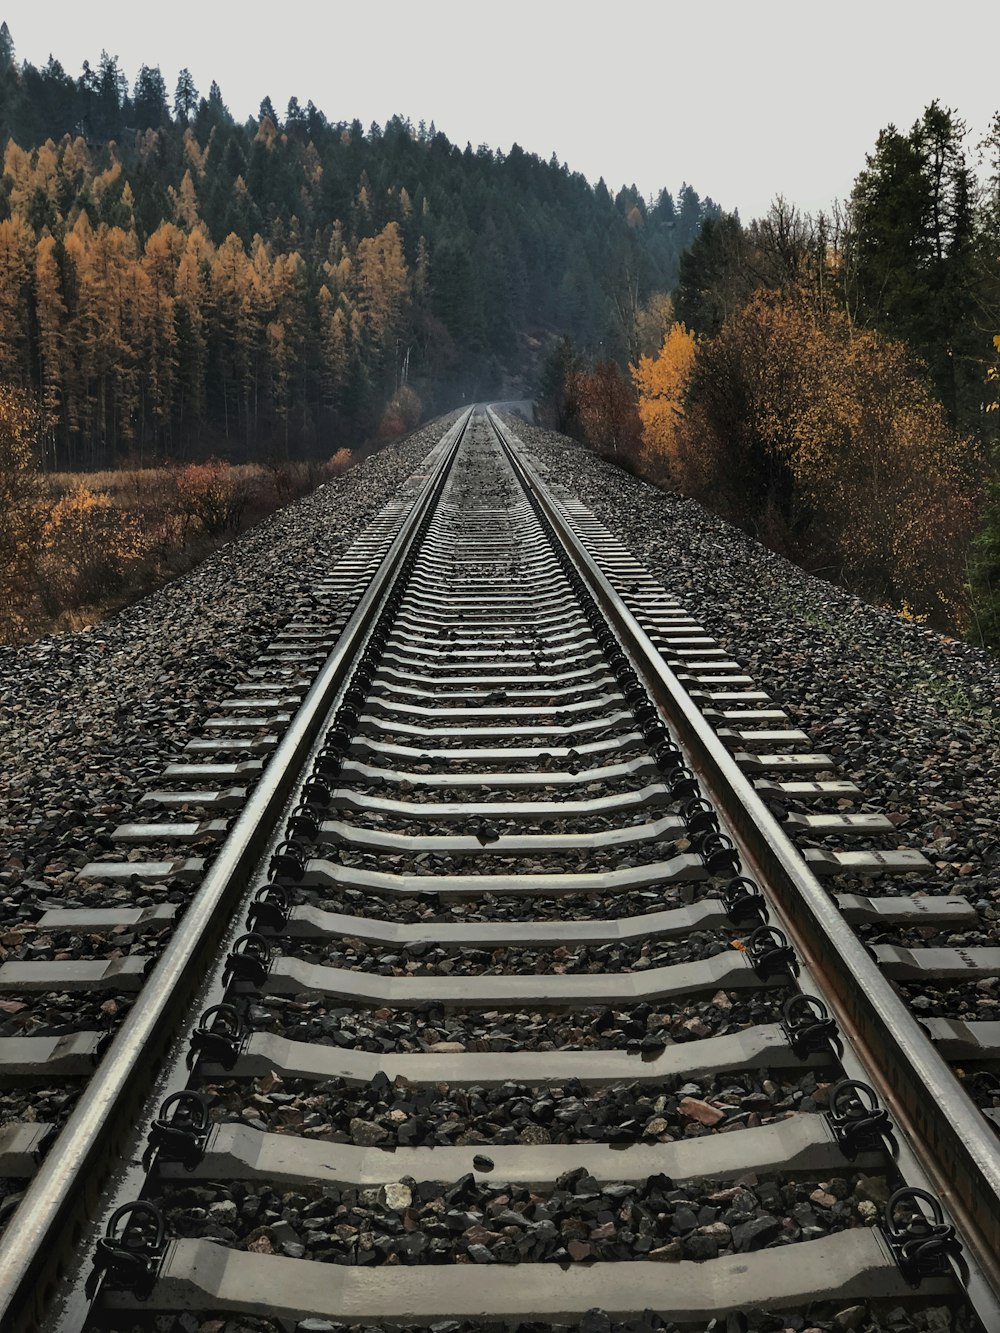 500+ Railway Track Pictures [HD] | Download Free Images on Unsplash